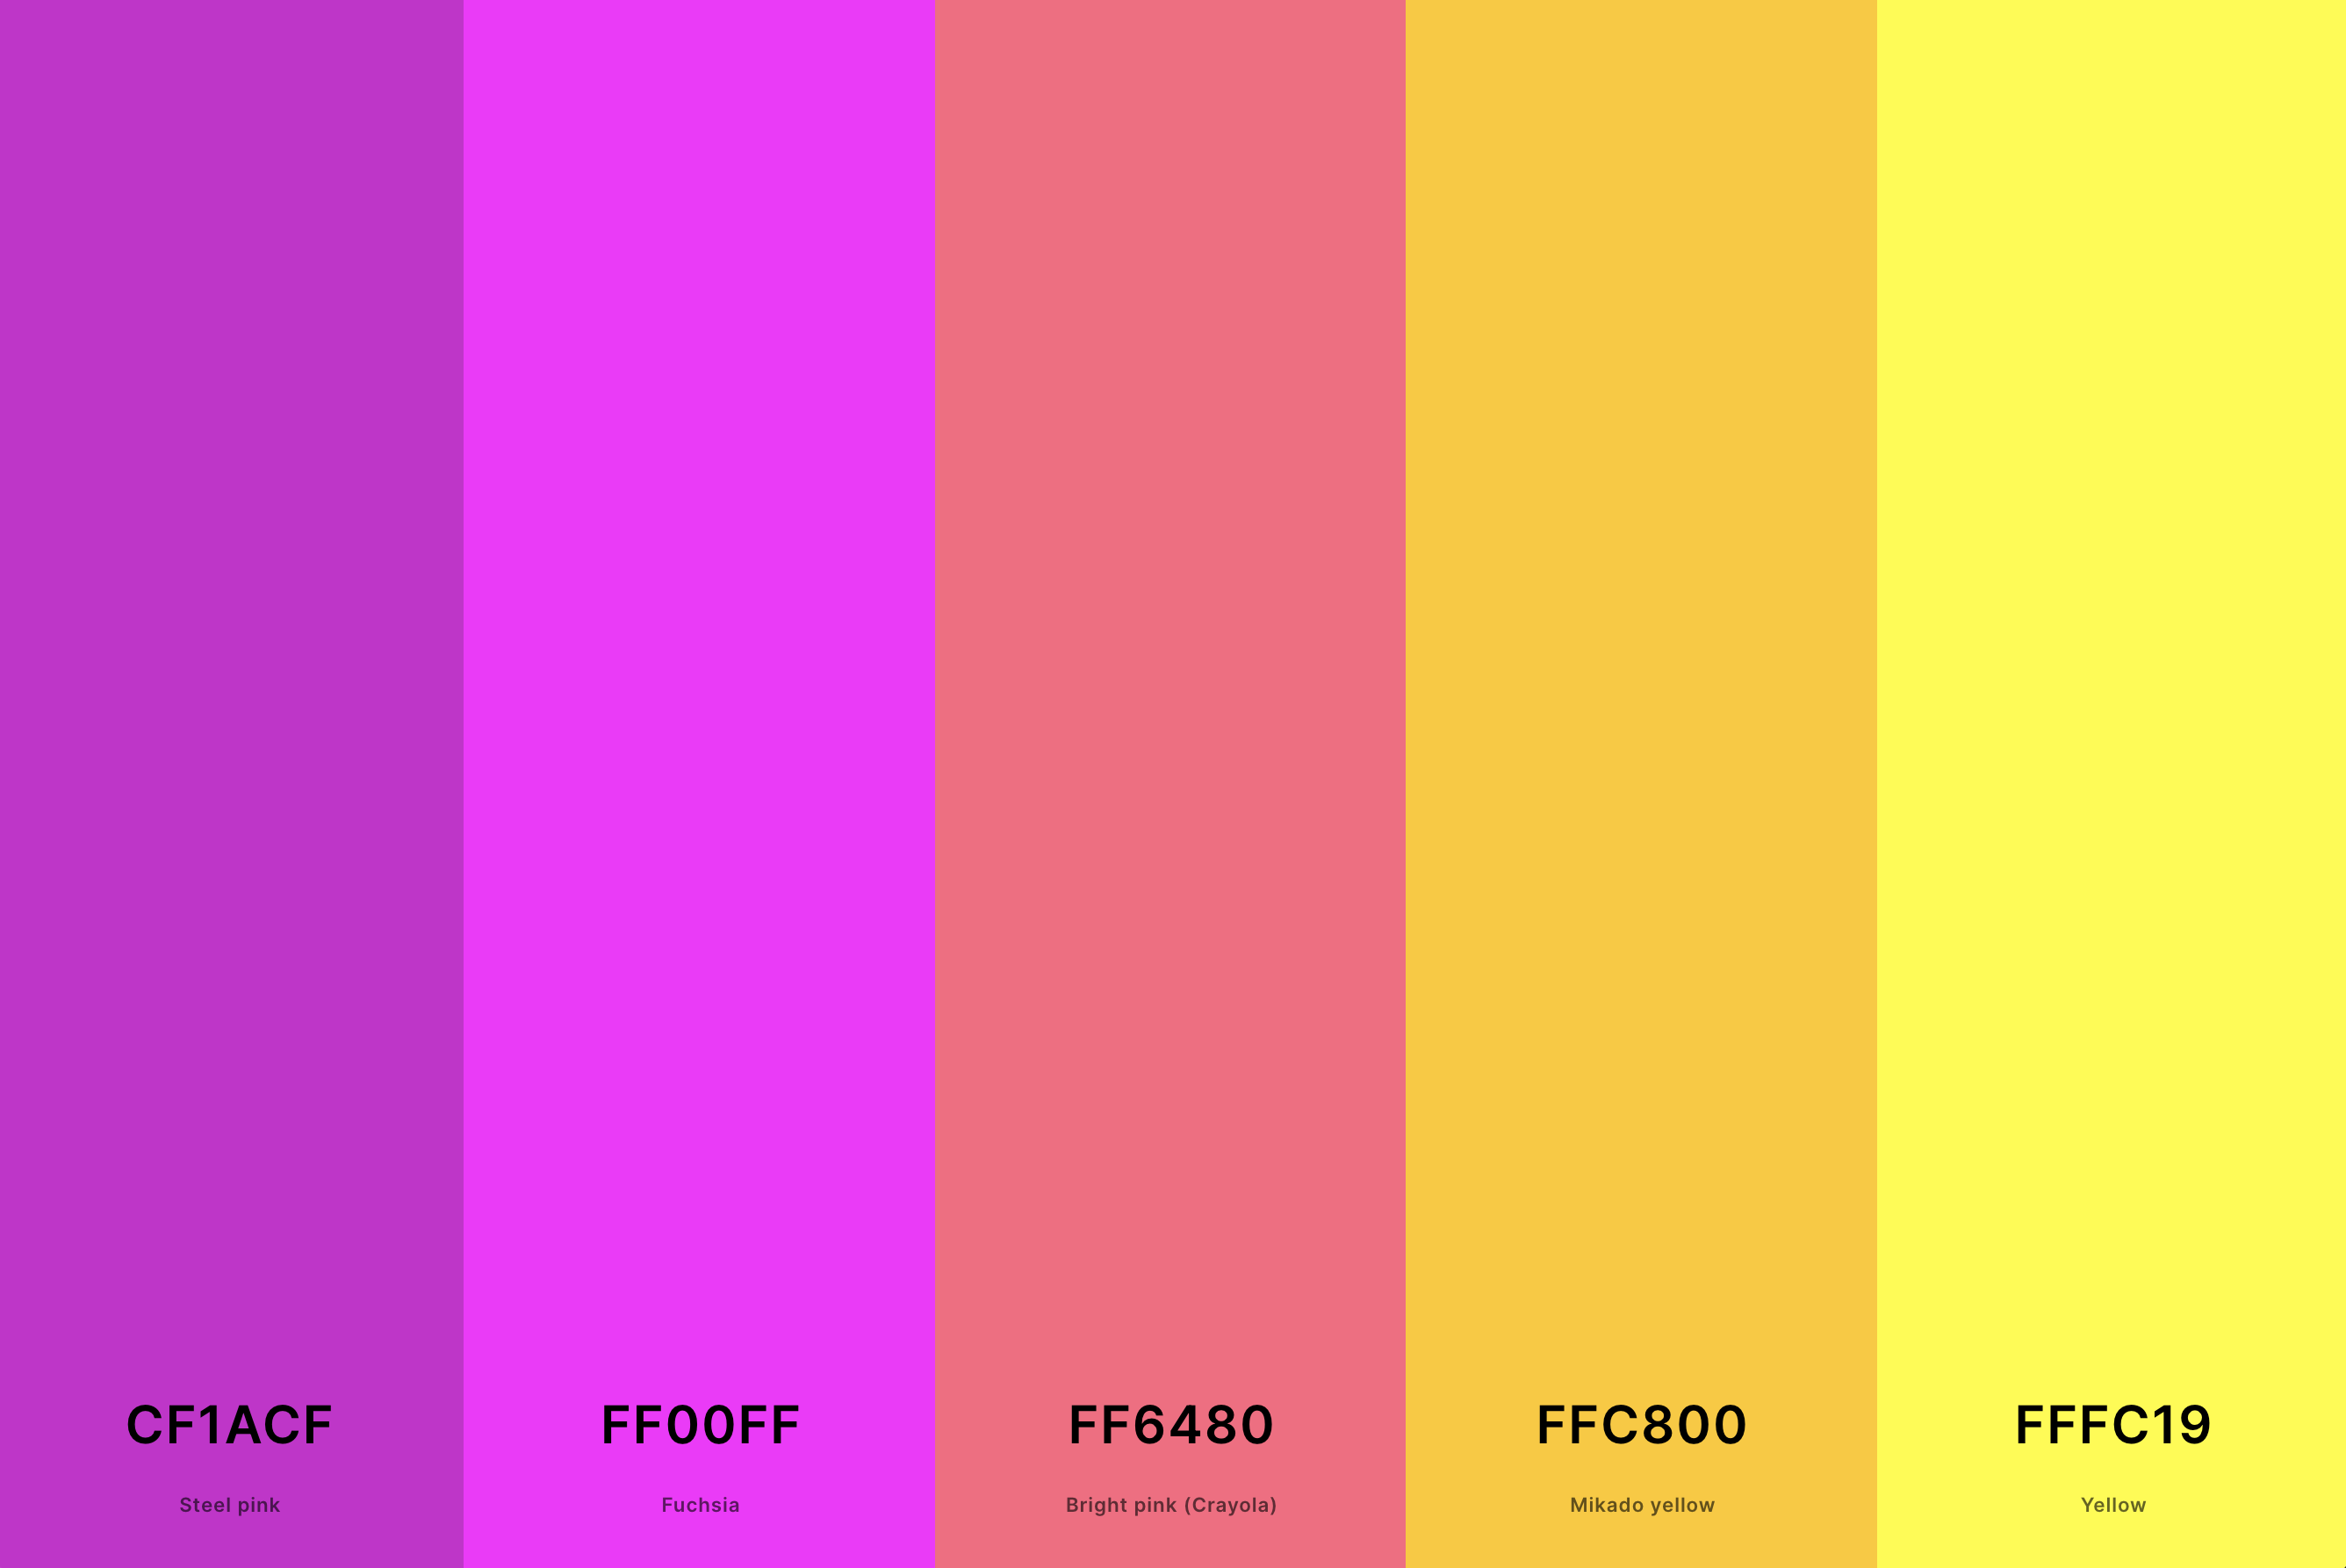 16. Yellow And Magenta Color Palette Color Palette with Steel Pink (Hex #CF1ACF) + Magenta (Hex #FF00FF) + Bright Pink (Crayola) (Hex #FF6480) + Mikado Yellow (Hex #FFC800) + Yellow (Hex #FFFC19) Color Palette with Hex Codes